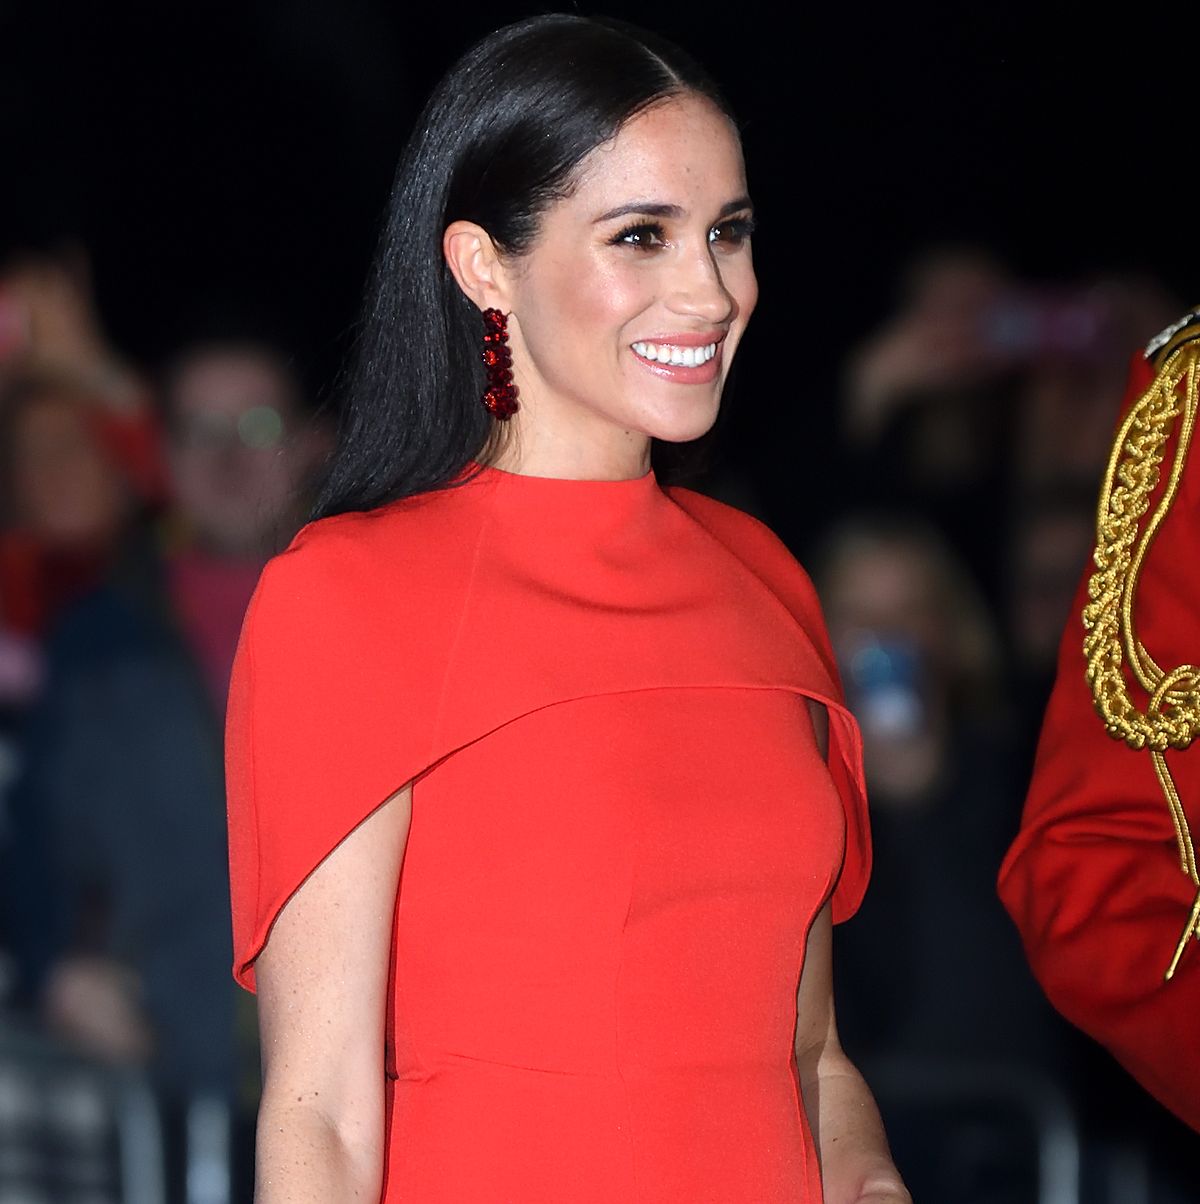 london, england   march 07  meghan, duchess of sussex accompanied by prince harry, duke of sussex attends the mountbatten festival of music at royal albert hall on march 07, 2020 in london, england photo by karwai tangwireimage